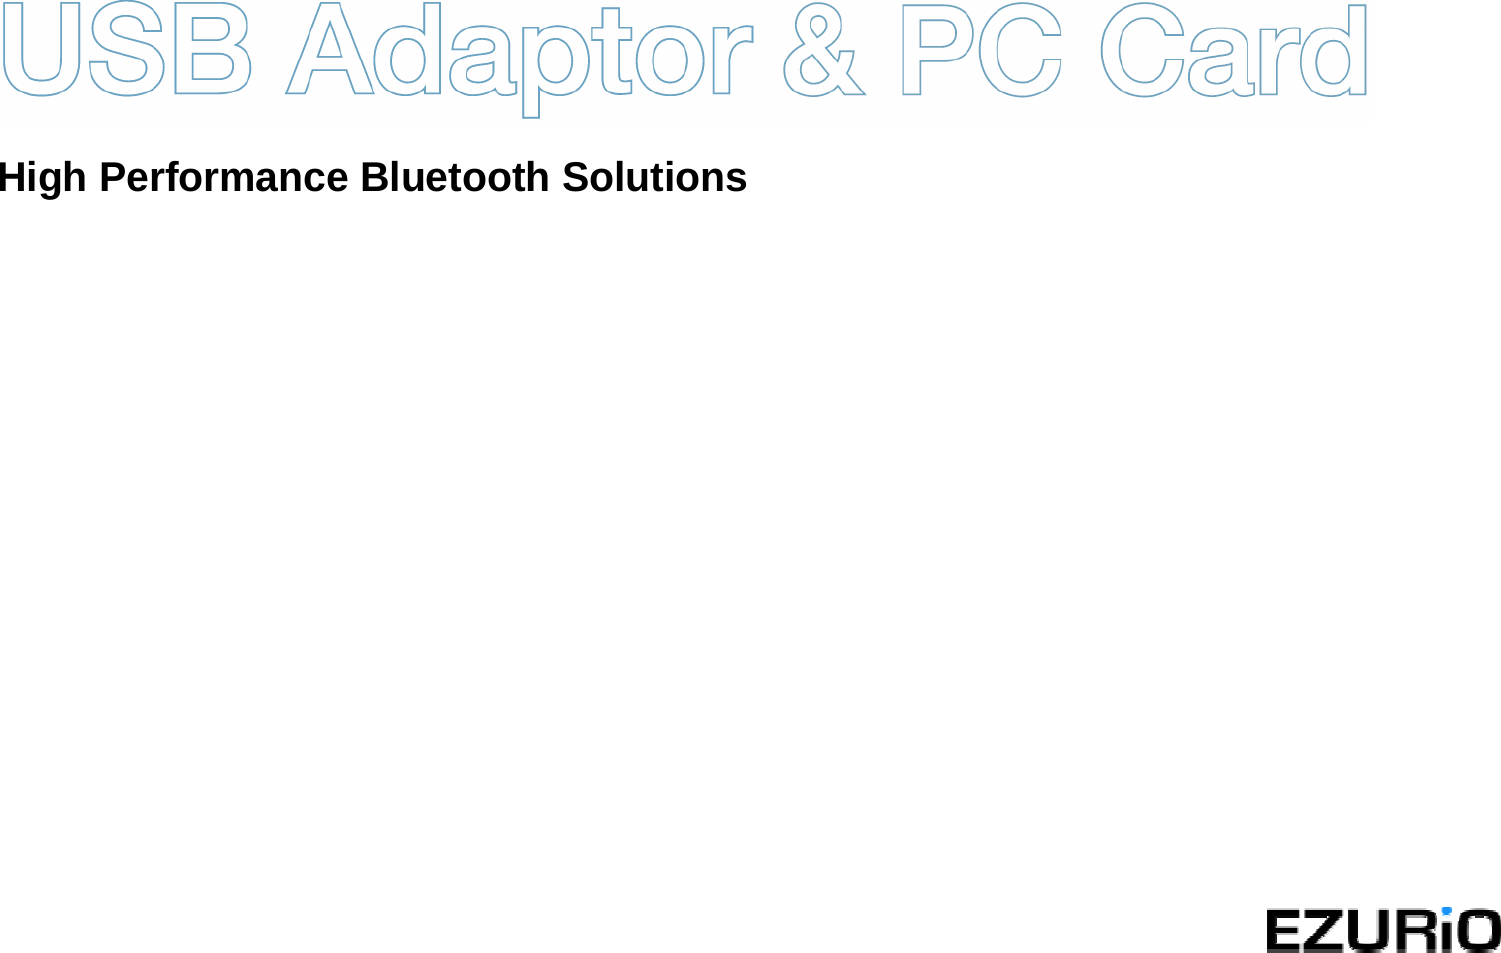        High Performance Bluetooth Solutions                                    